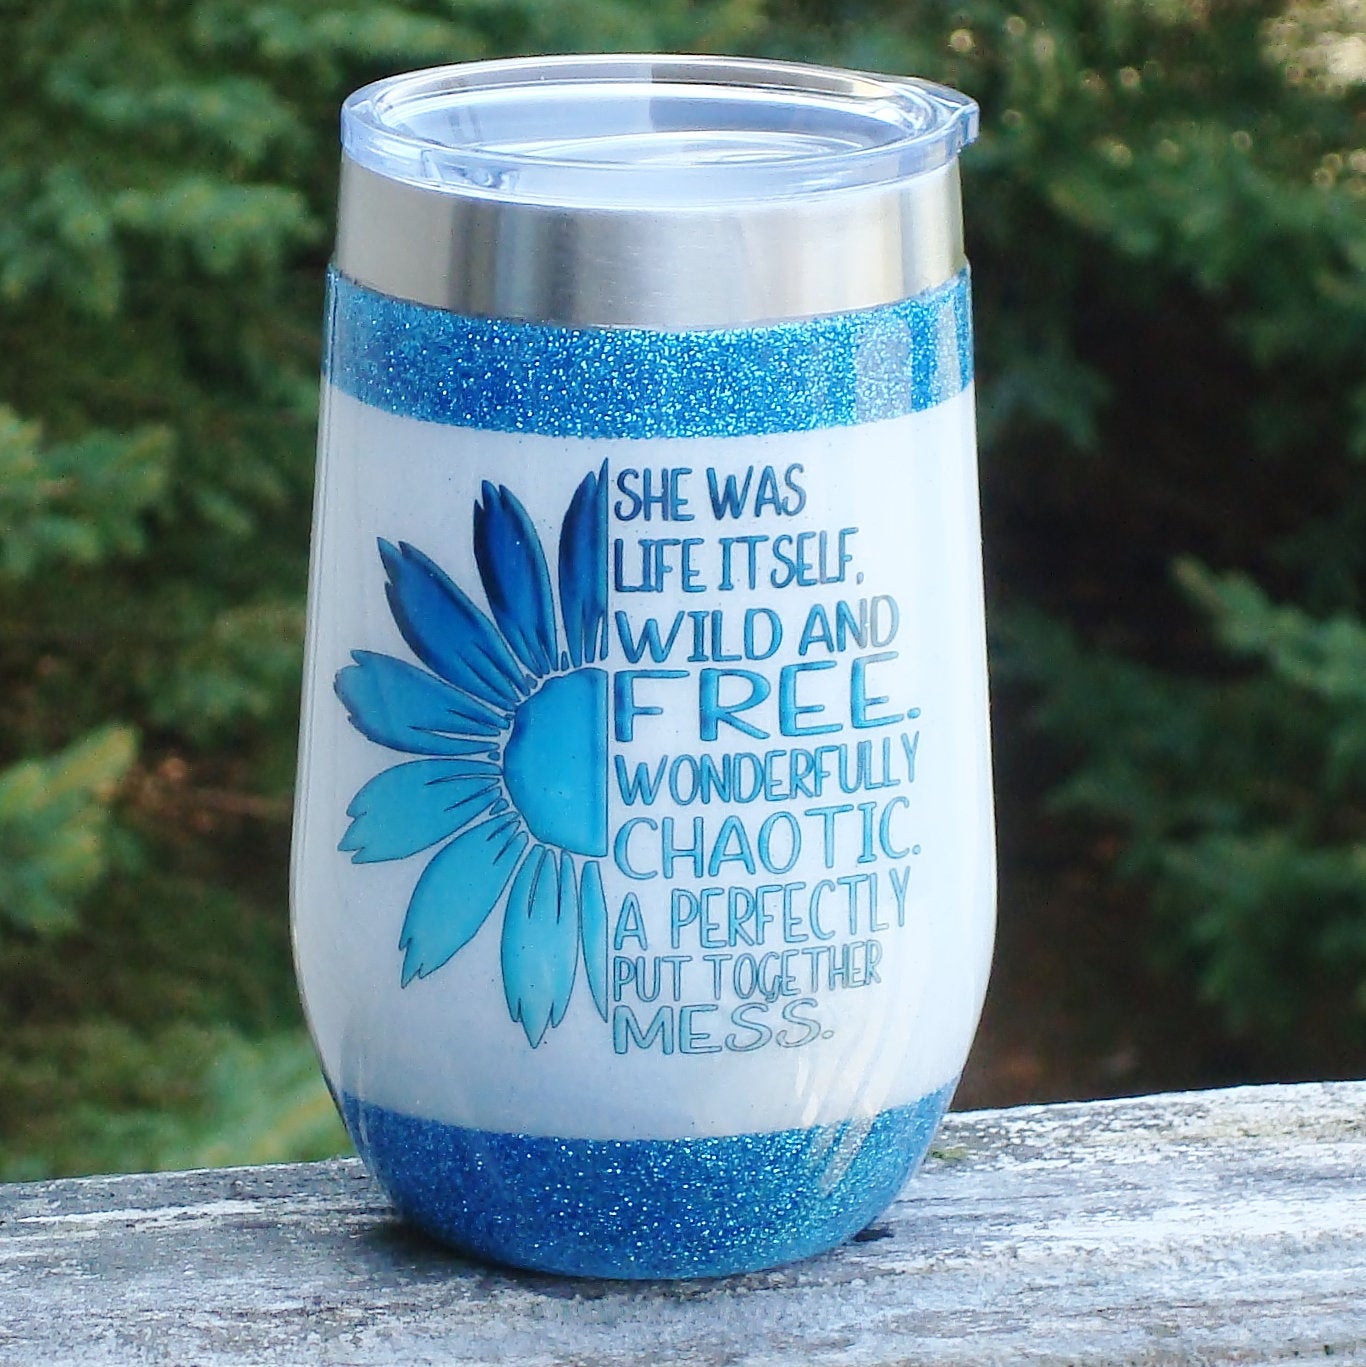 16 oz Teal Sunflower Chaos glitter mica wine stainless steel tumbler Birthday Graduation Gift for her